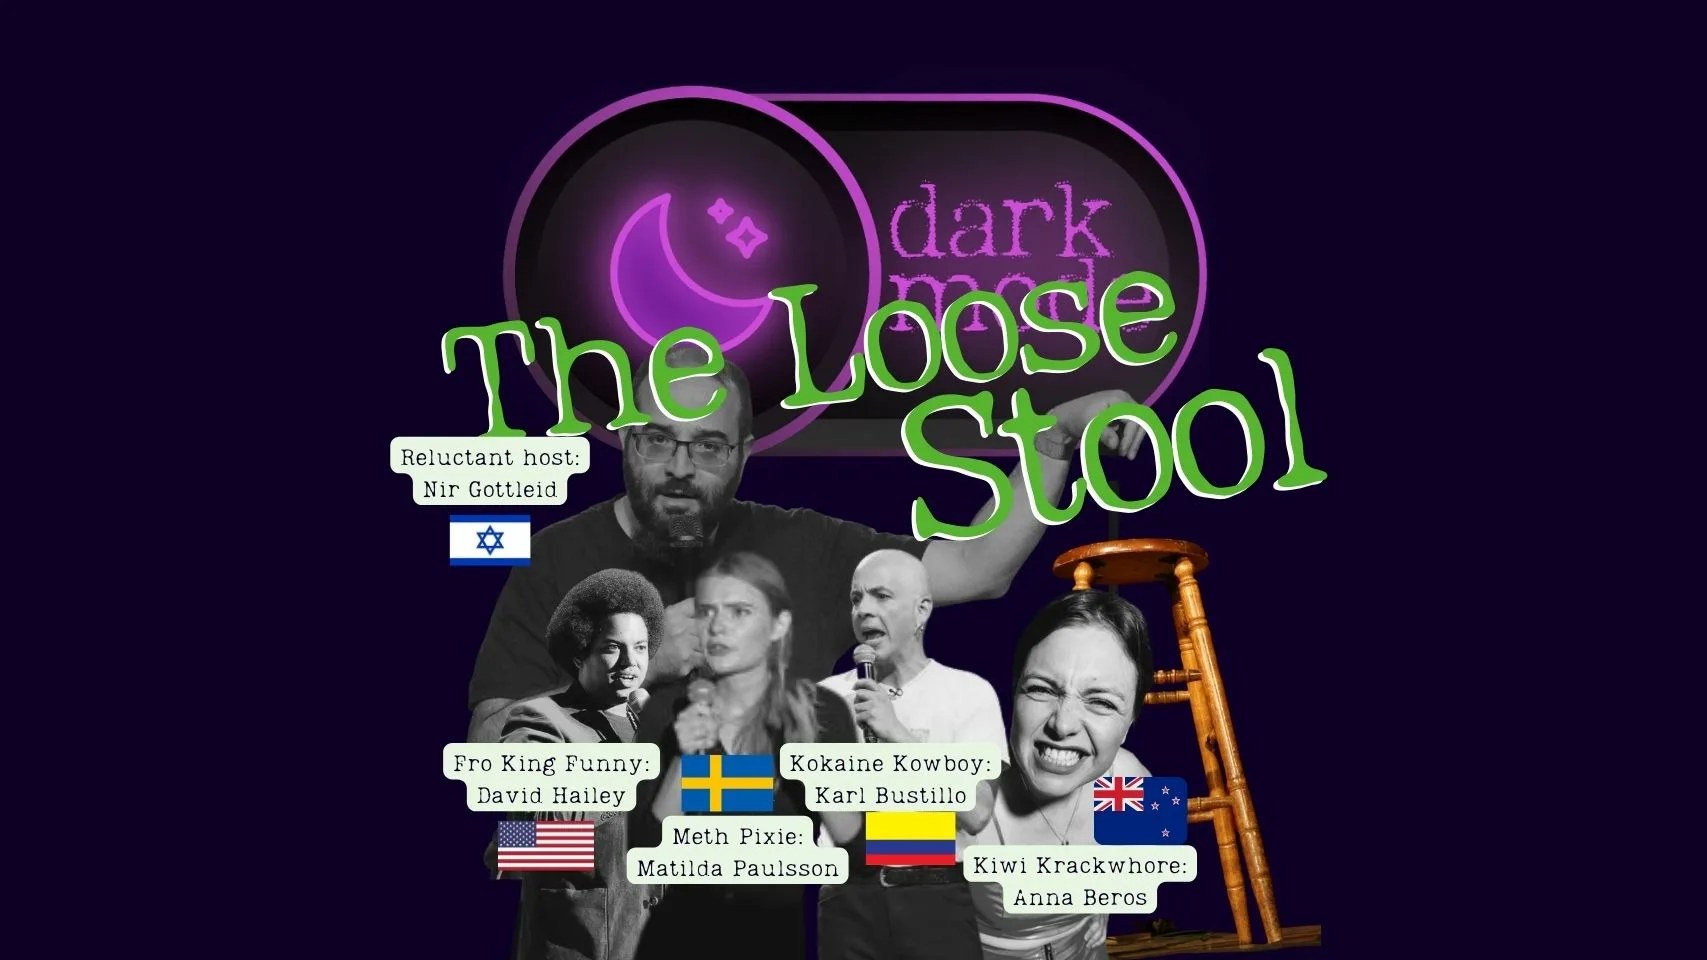 Dark Mode Late Show #18 (#36) – “The Loose Stool” Open Mic